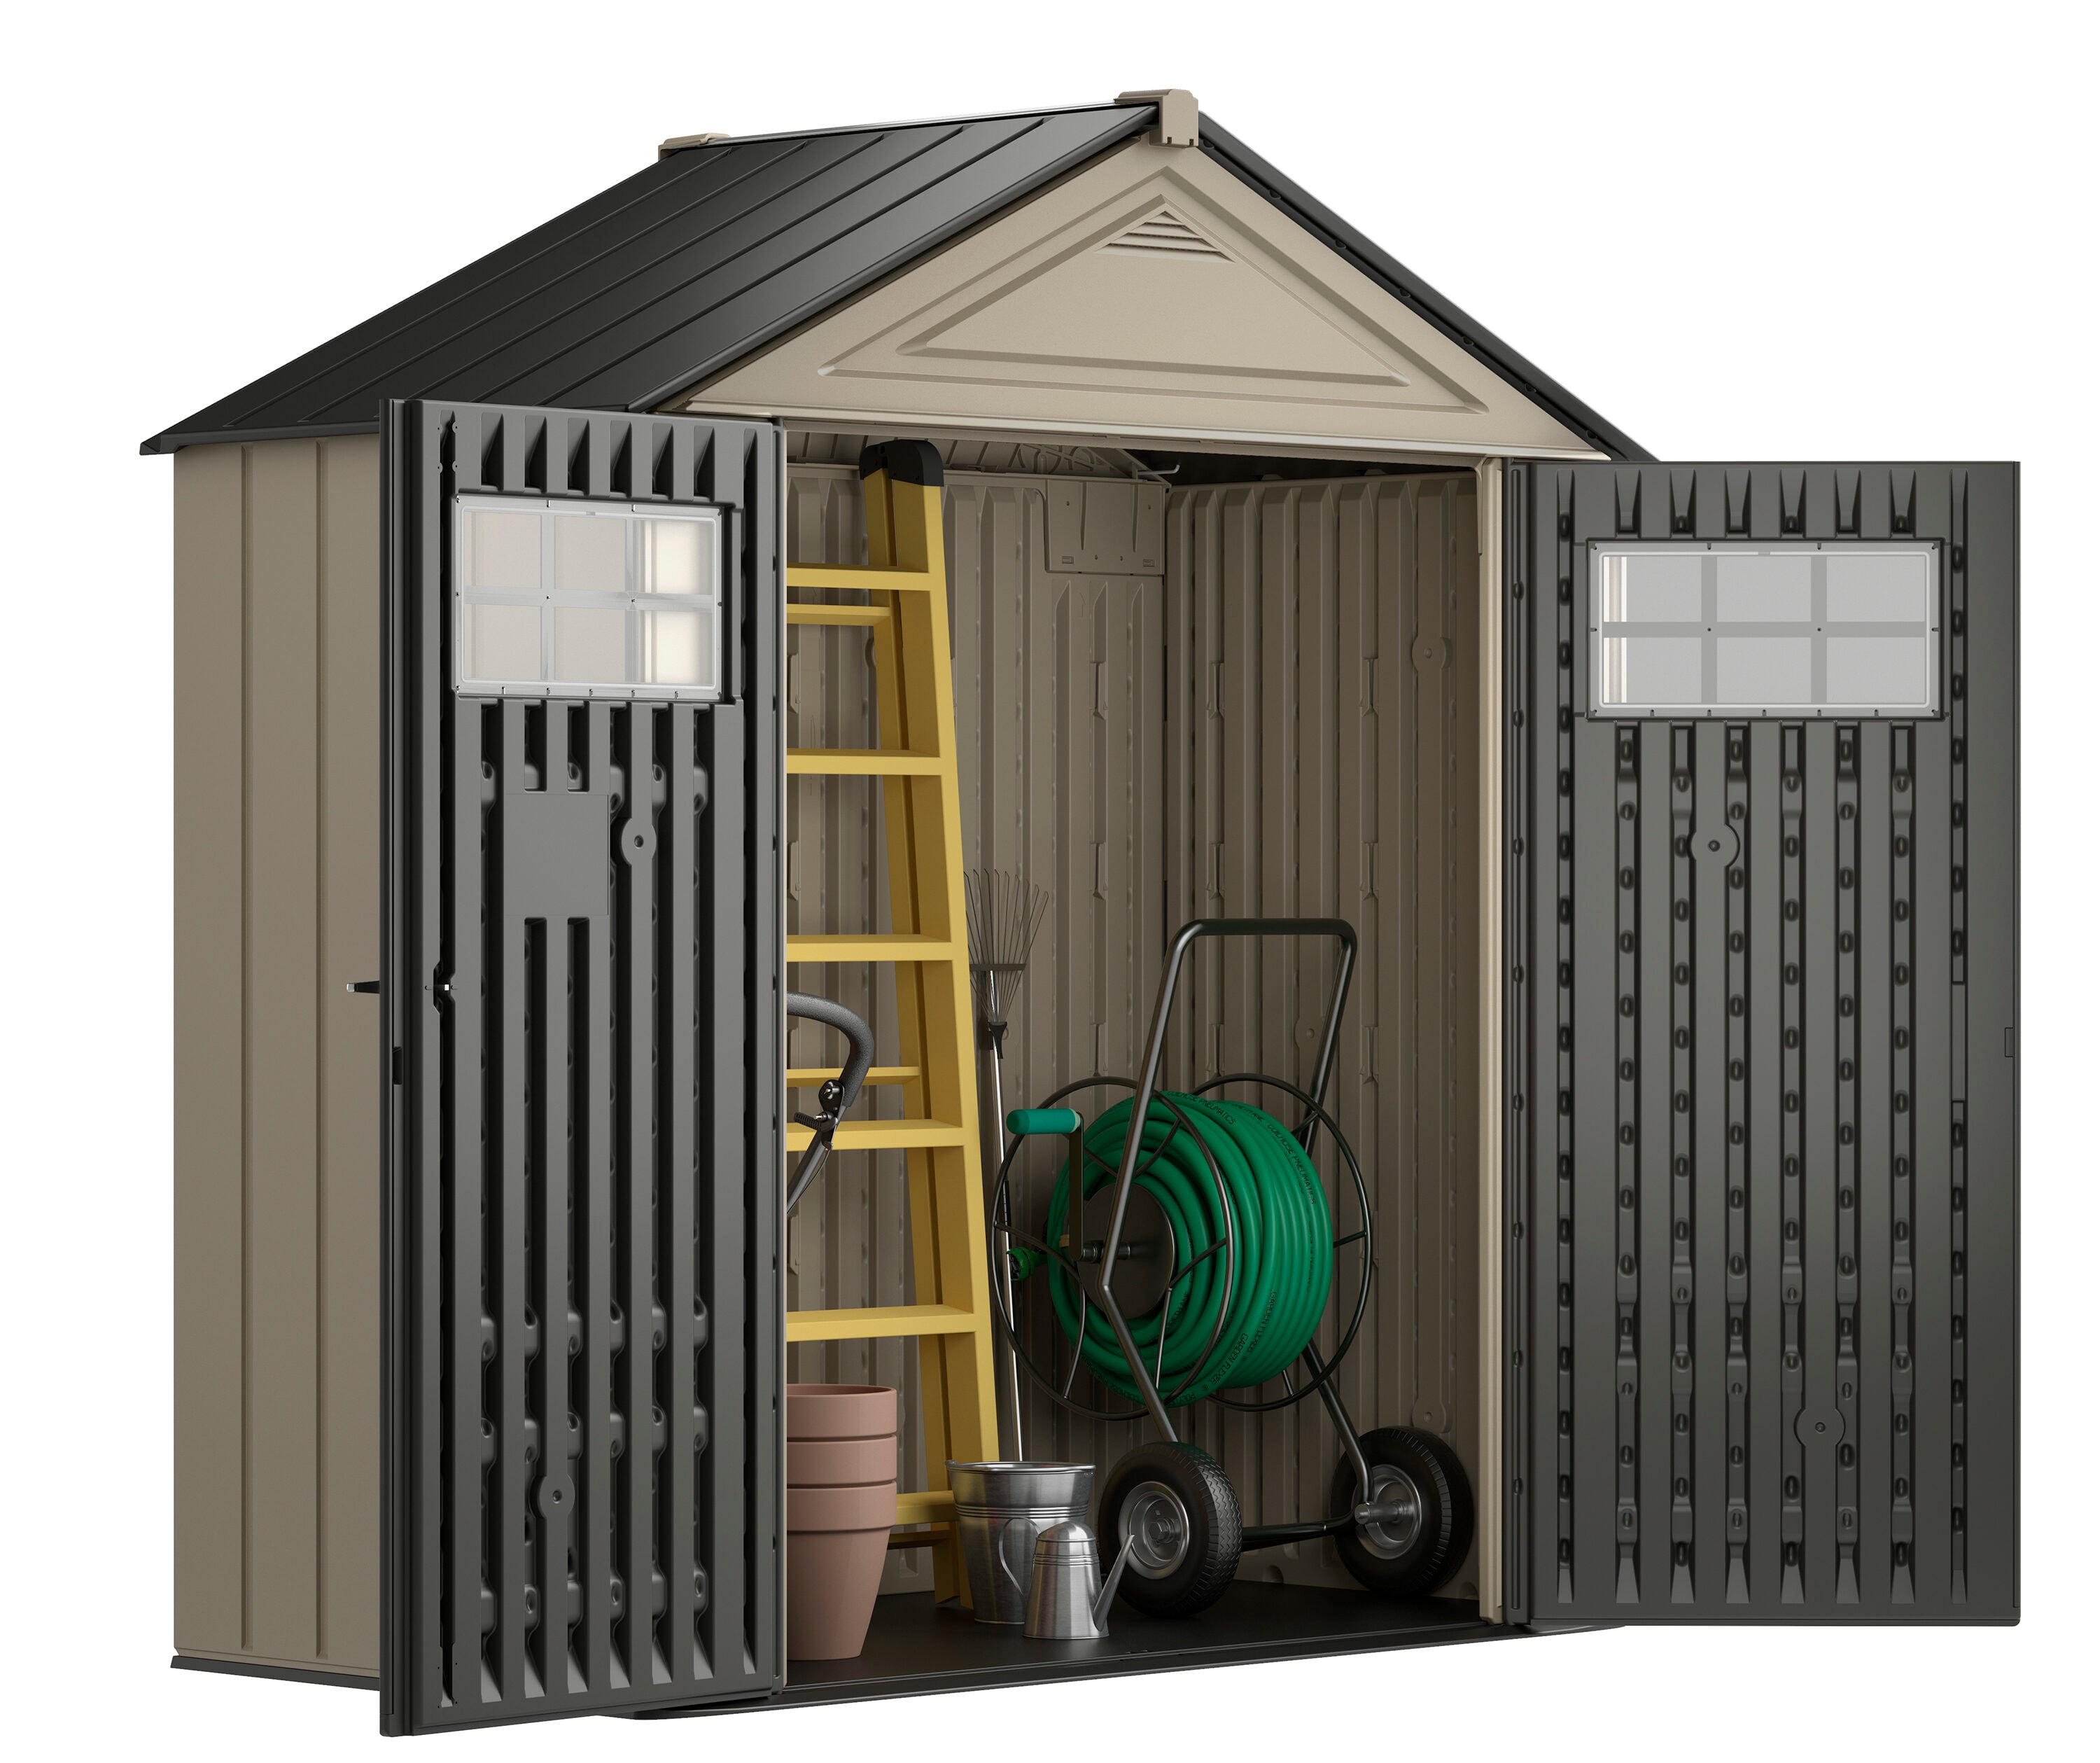 Rubbermaid 7x3 Foot Double Wall Plastic Outdoor Utility Storage Shed,  Sandstone, 1 Piece - Kroger